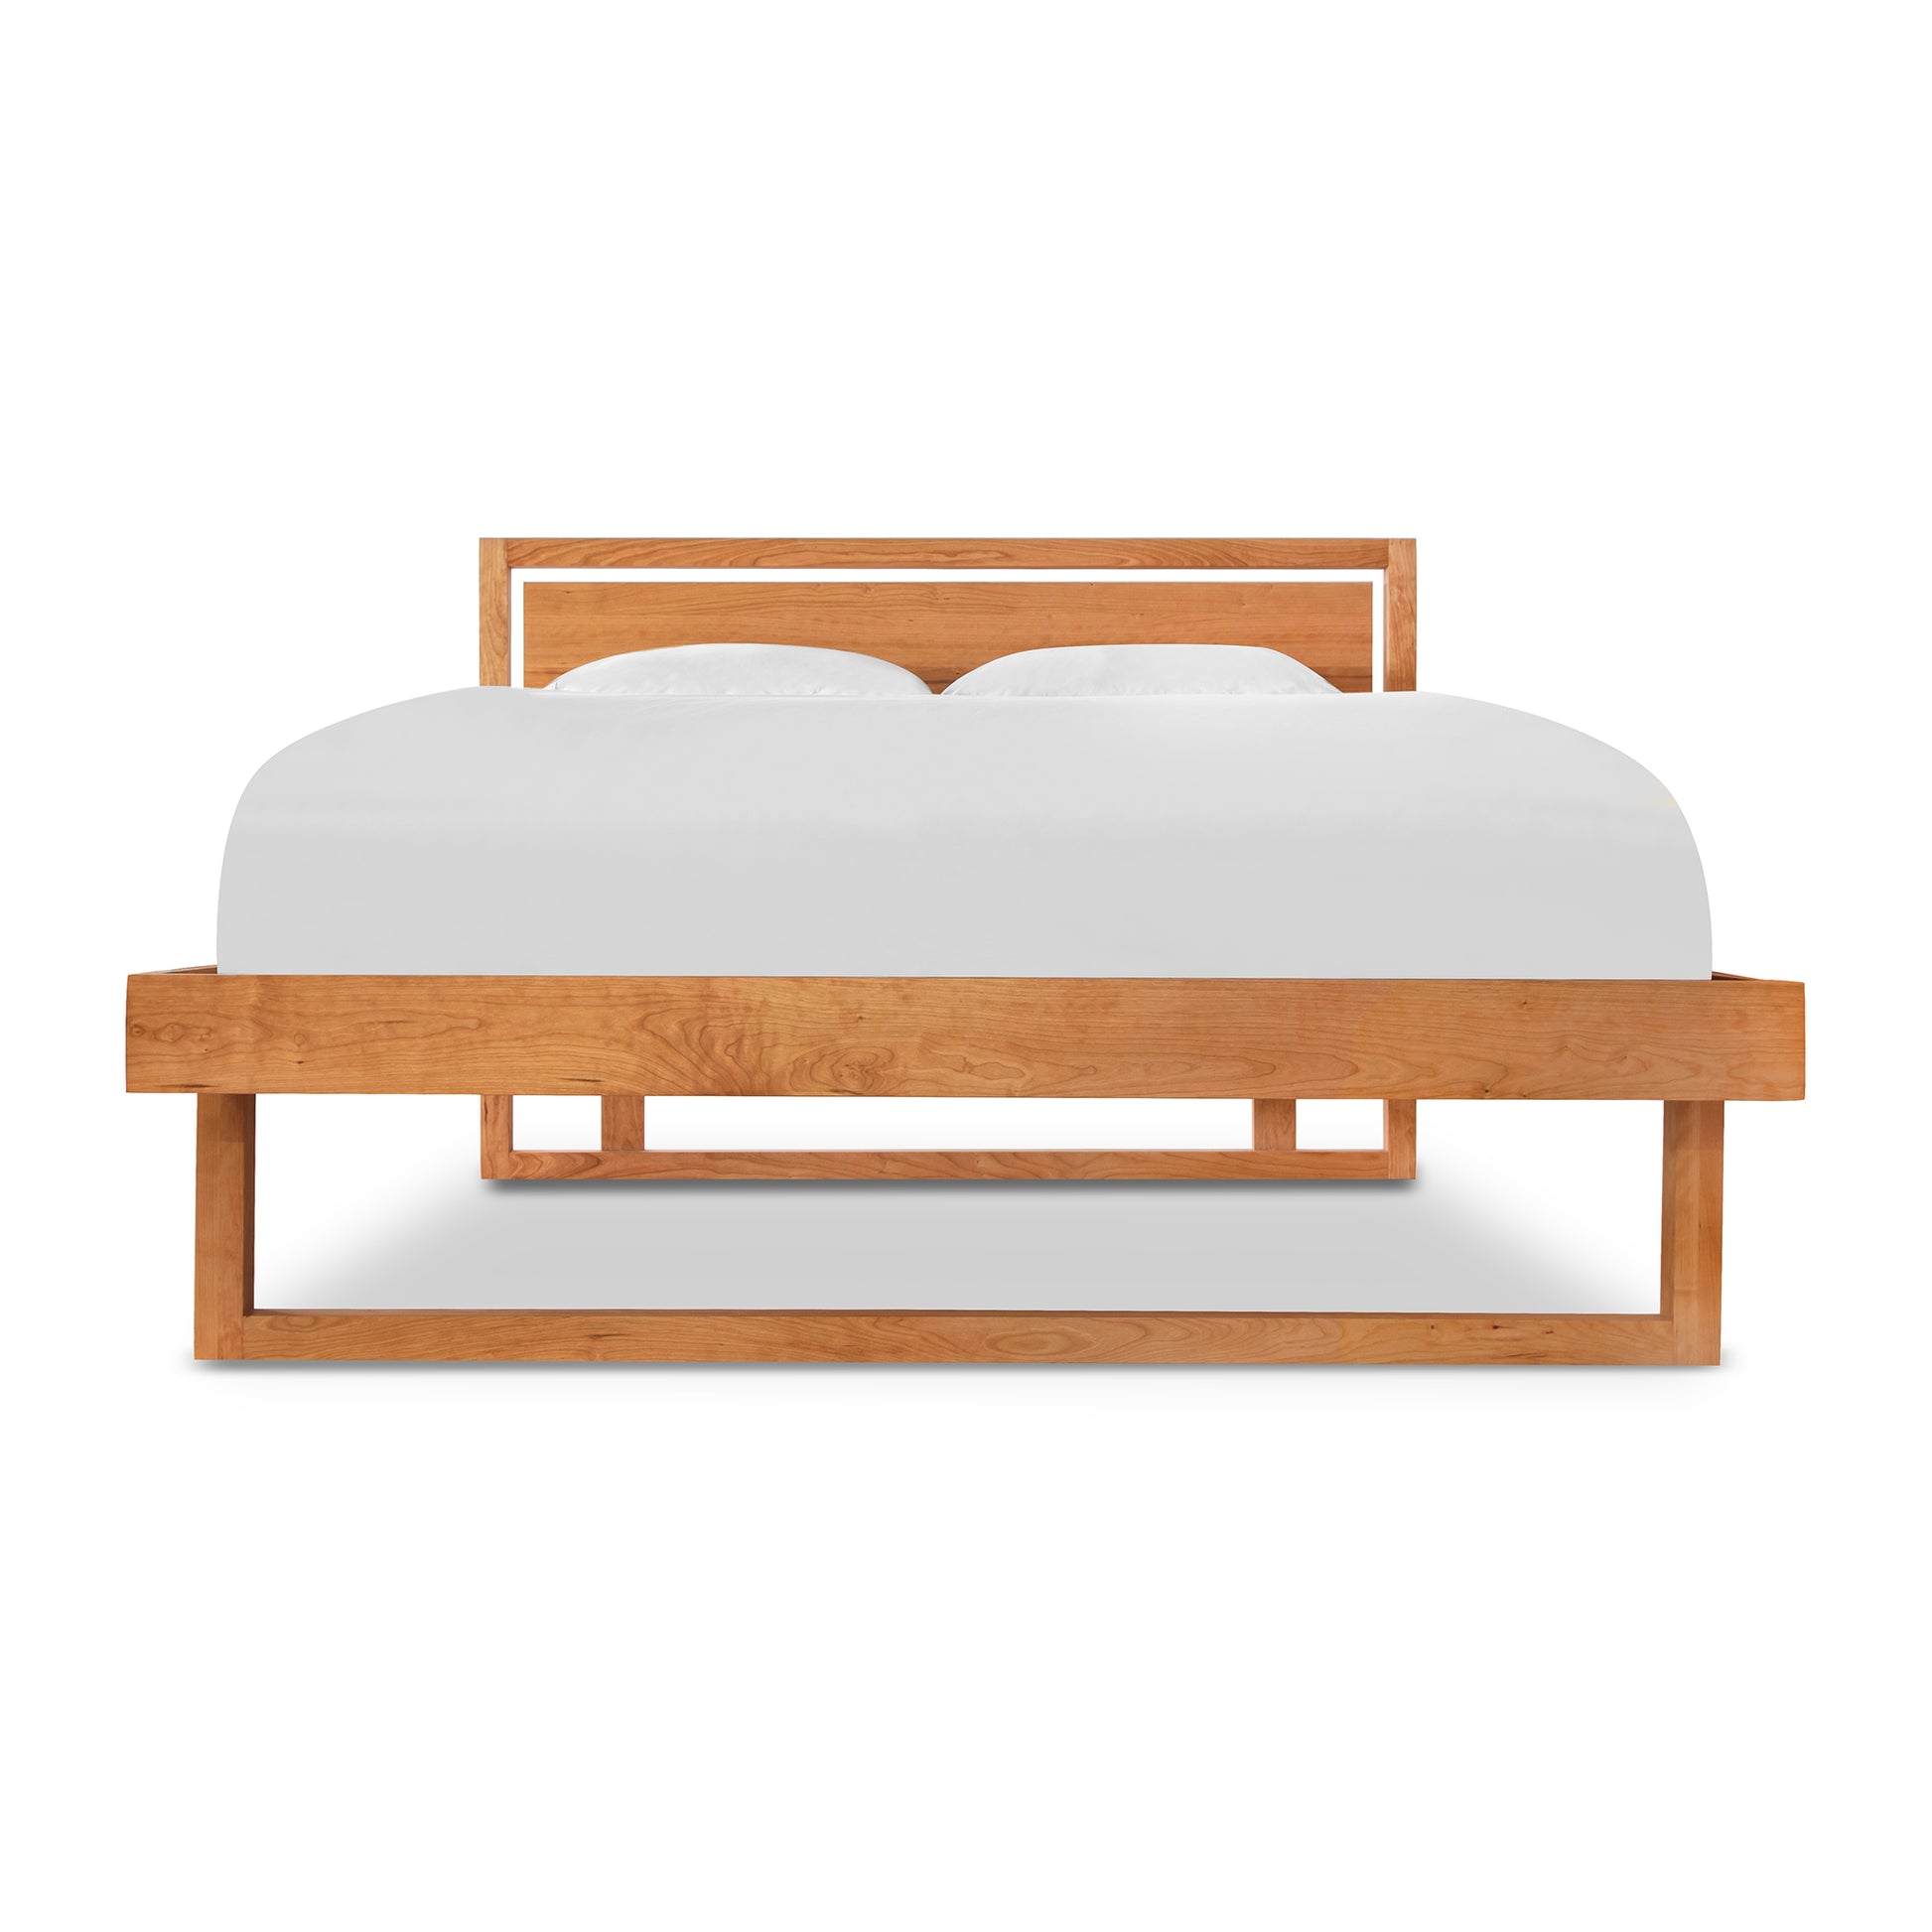 A Vermont Furniture Designs Pendant Bed with a wooden frame and white sheets.